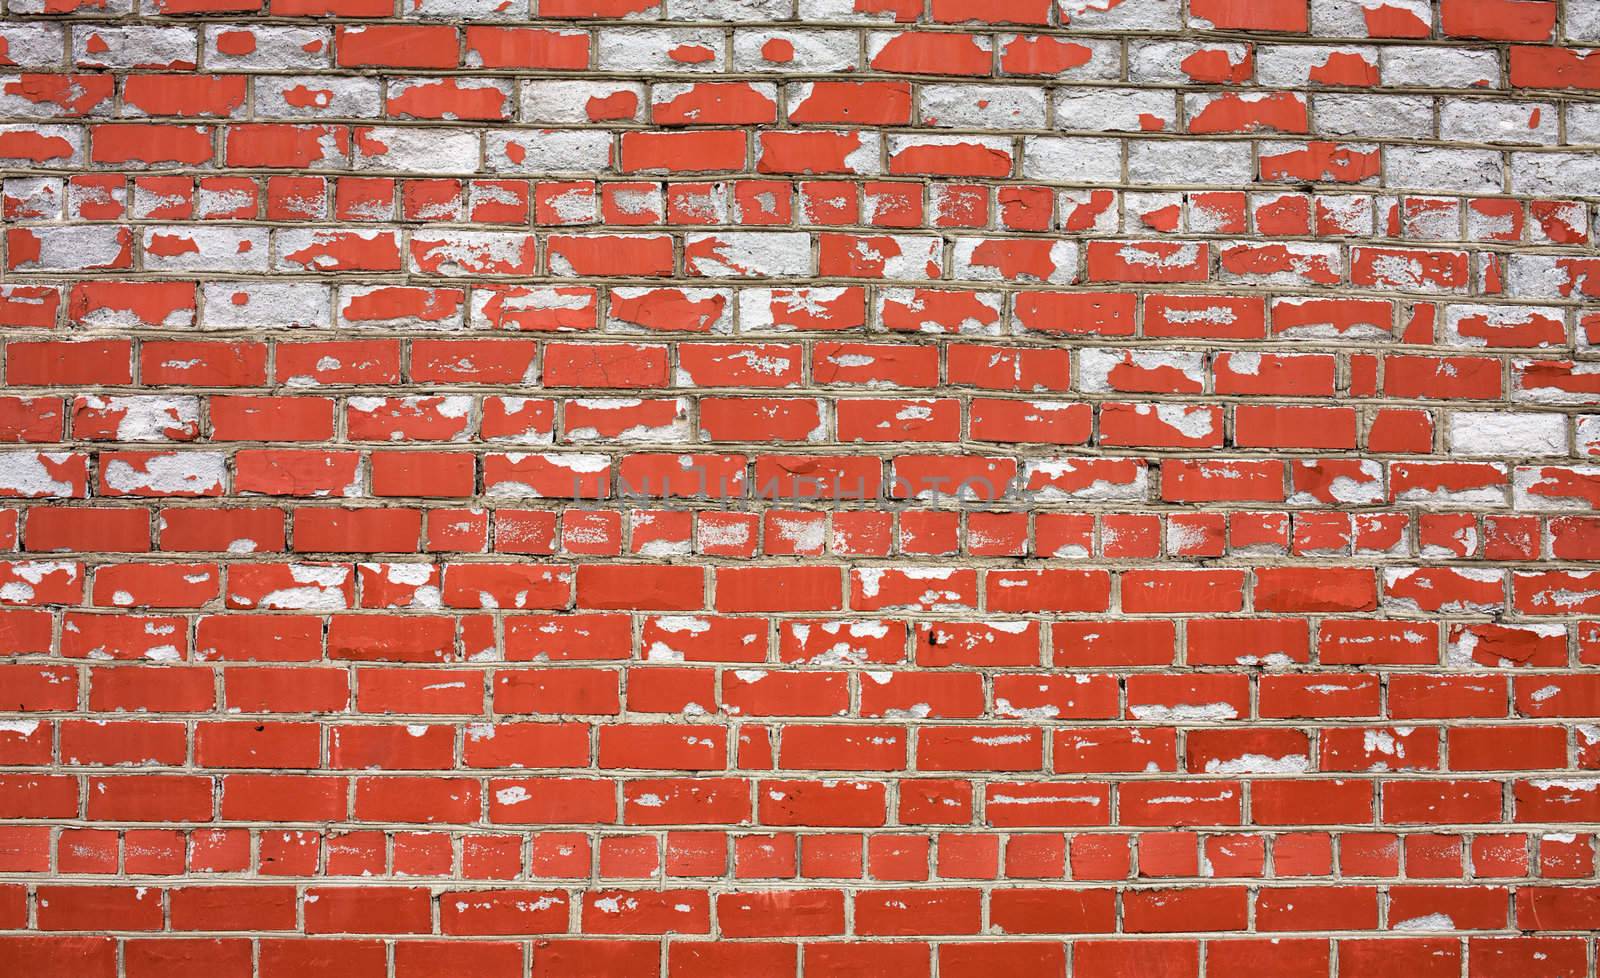 Decayed brick wall covered by a red paint